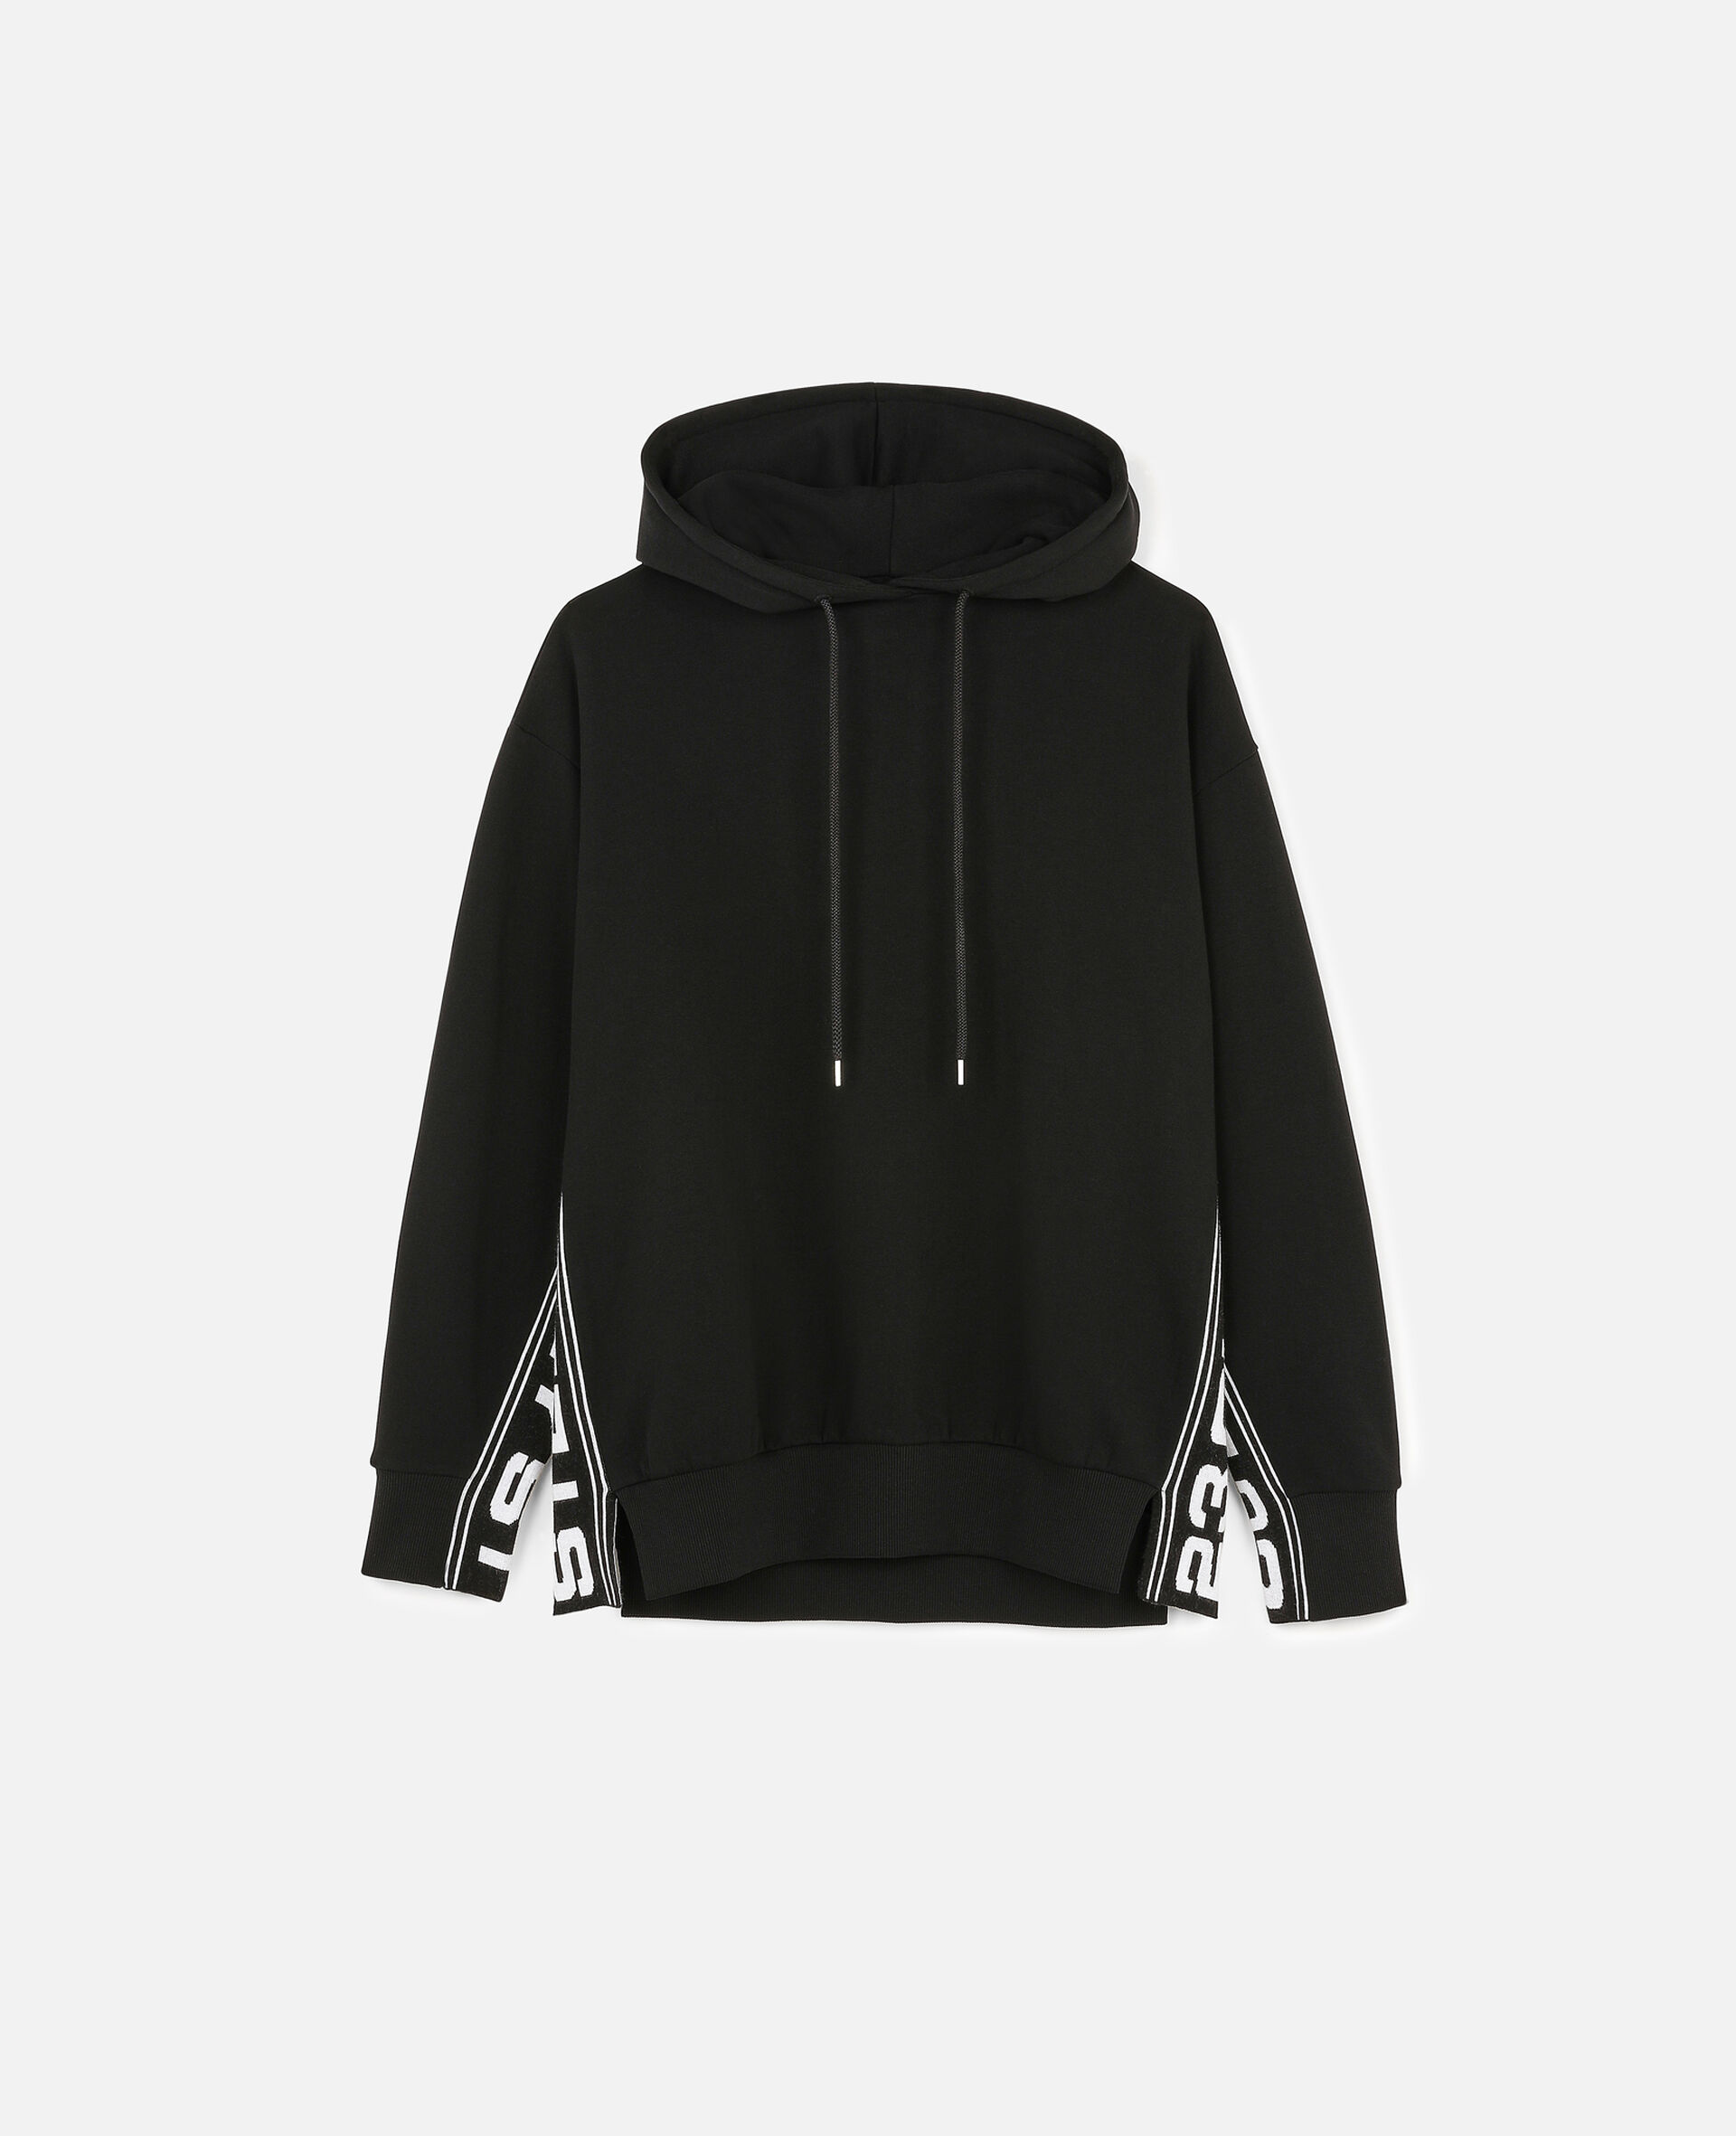 23 OBS Knitted Hoodie-Black-large image number 0